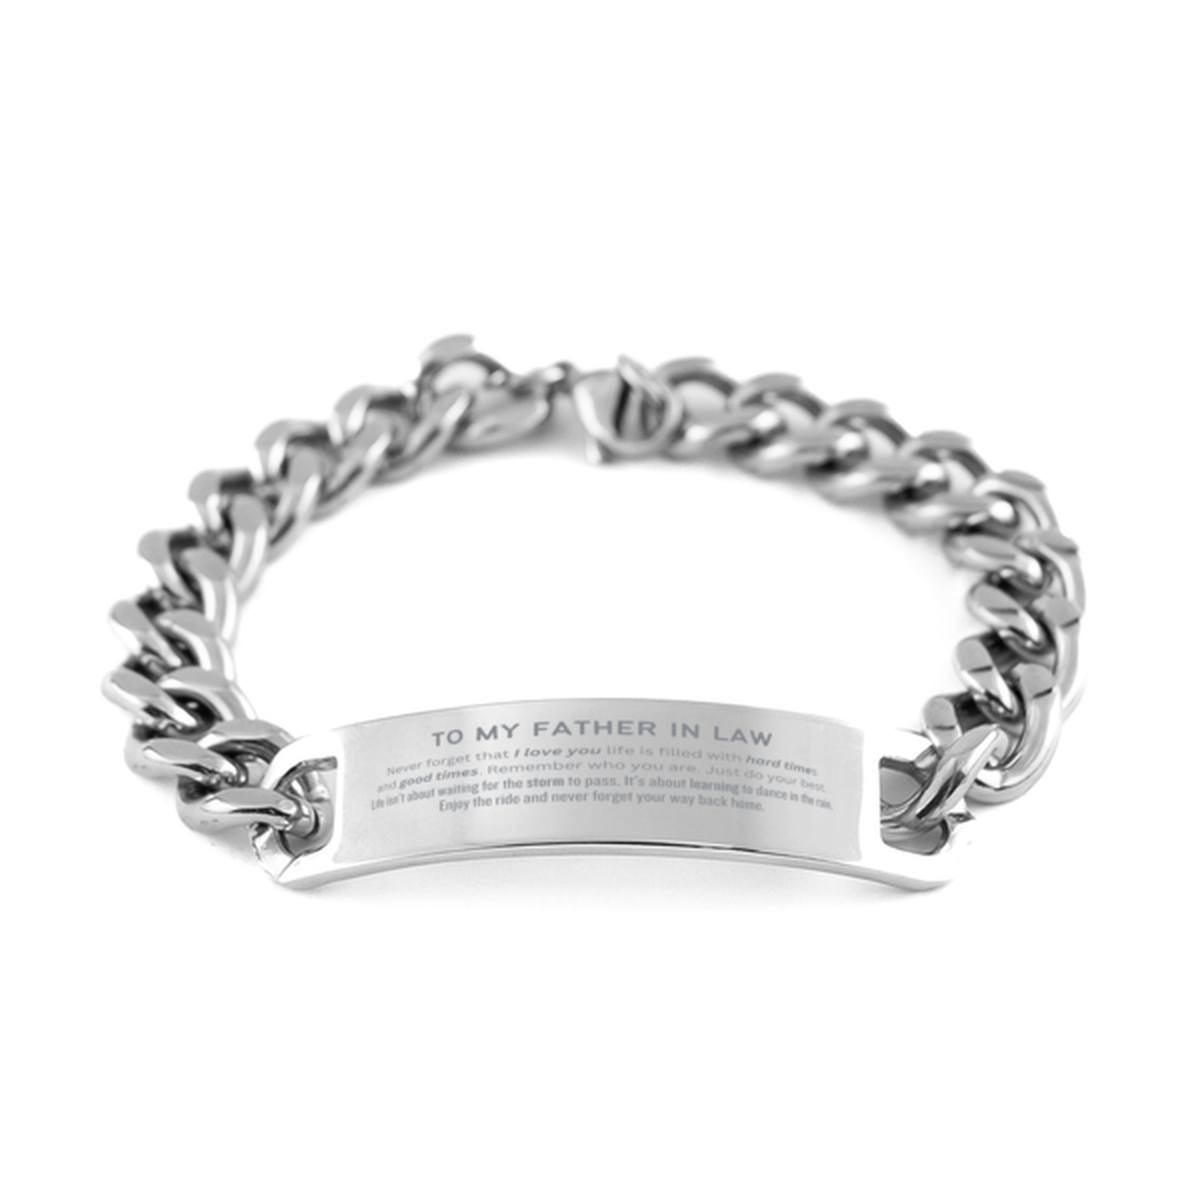 Christmas Father In Law Cuban Chain Stainless Steel Bracelet Gifts, To My Father In Law Birthday Thank You Gifts For Father In Law, Graduation Unique Gifts For Father In Law To My Father In Law Never forget that I love you life is filled with hard times a